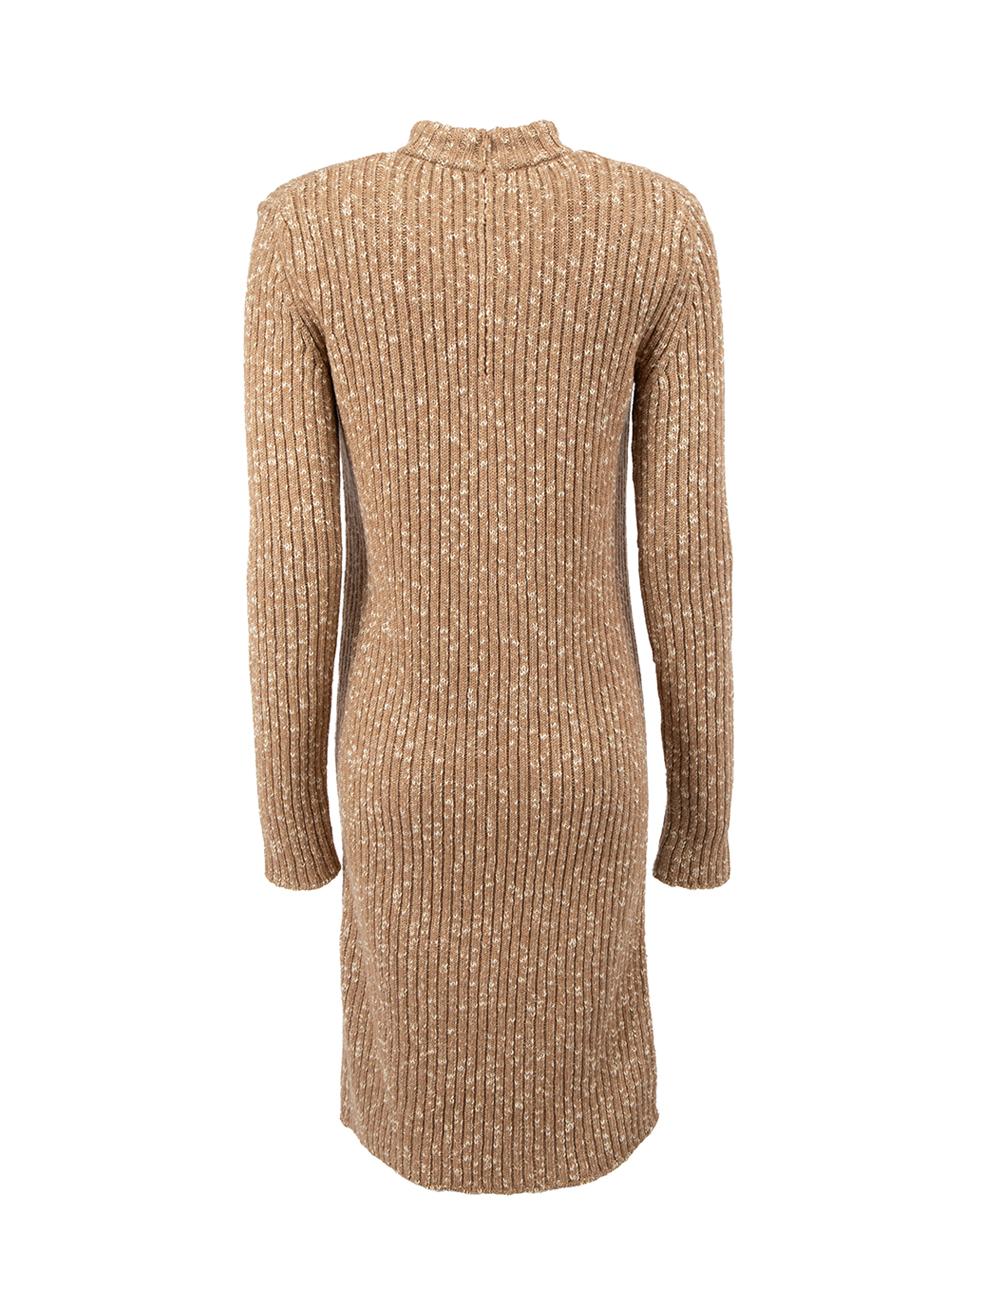 Celine Brown Marl Knitted Midi Dress Size S In Excellent Condition For Sale In London, GB